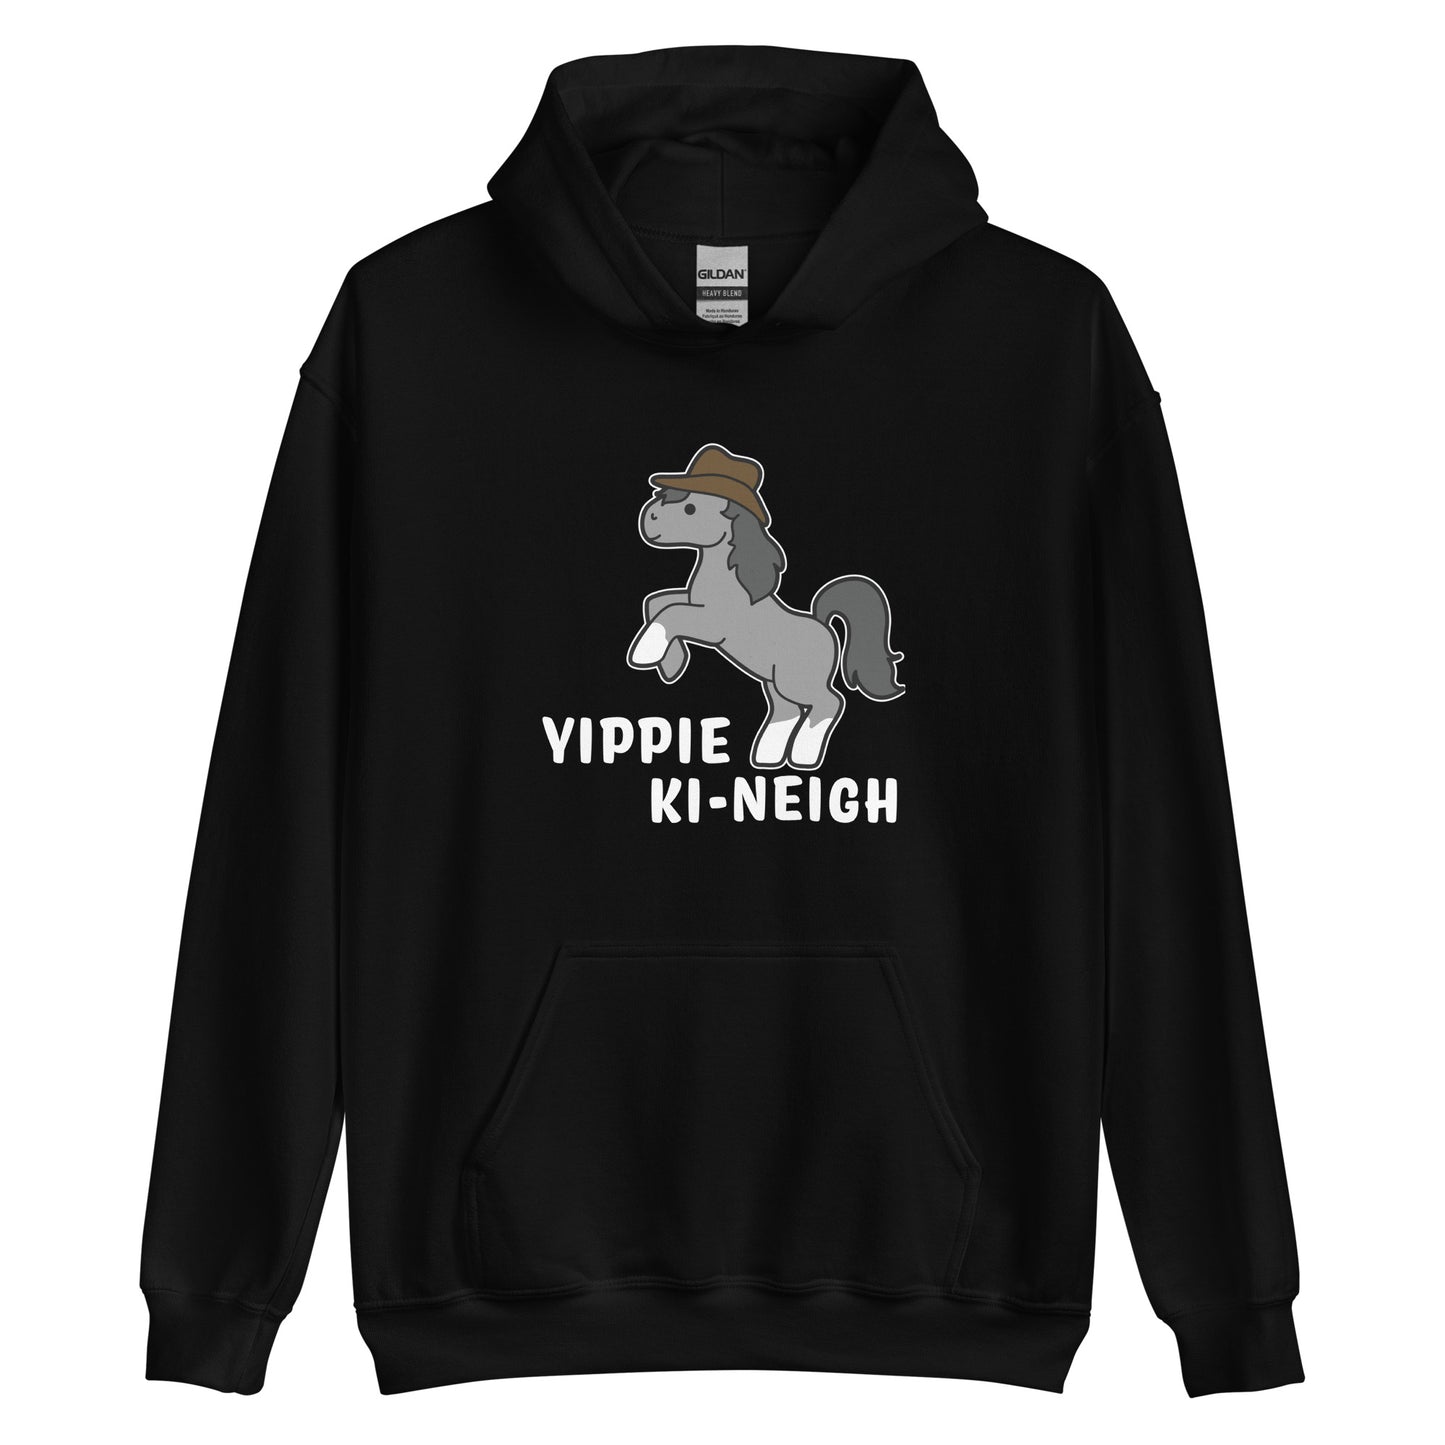 A black hooded sweatshirt featuring an illustration of a smiling grey pony rearing and wearing a cowboy hat. Text underneath the pony reads "Yippie Ki-Neigh"